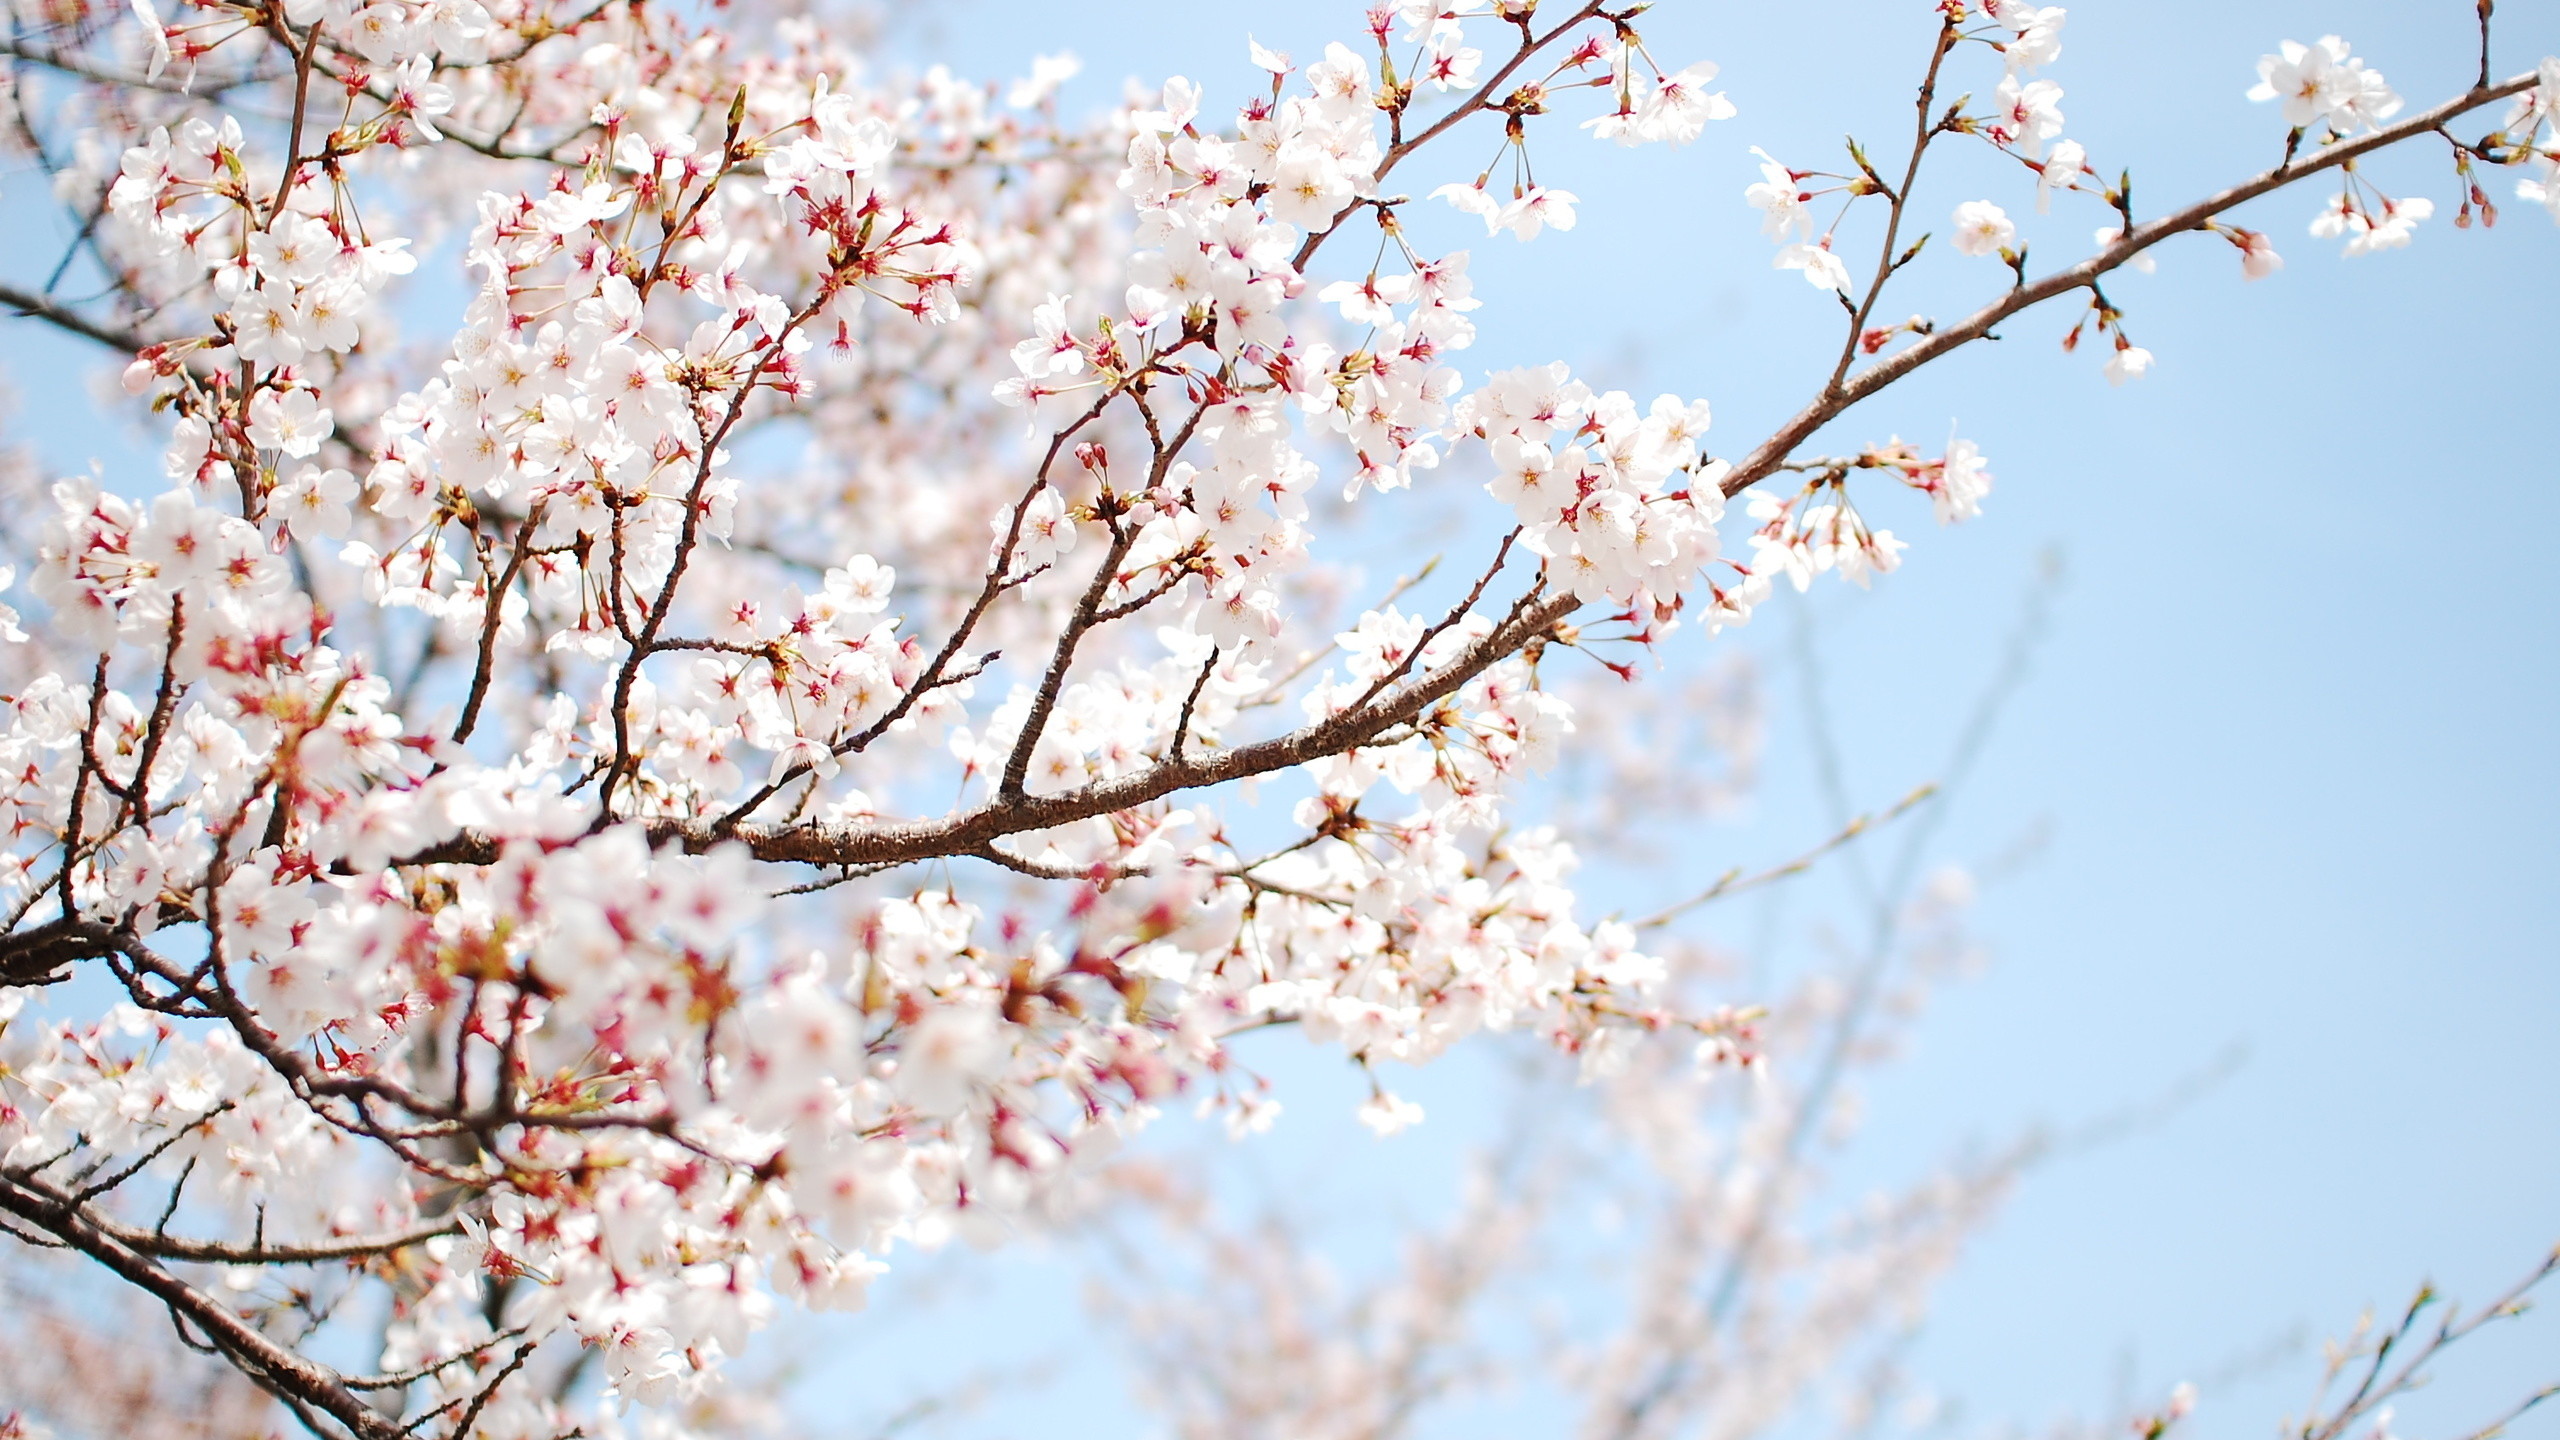 2560x1440 1000+ images about cherry blossoms on Pinterest | Nature, Spring